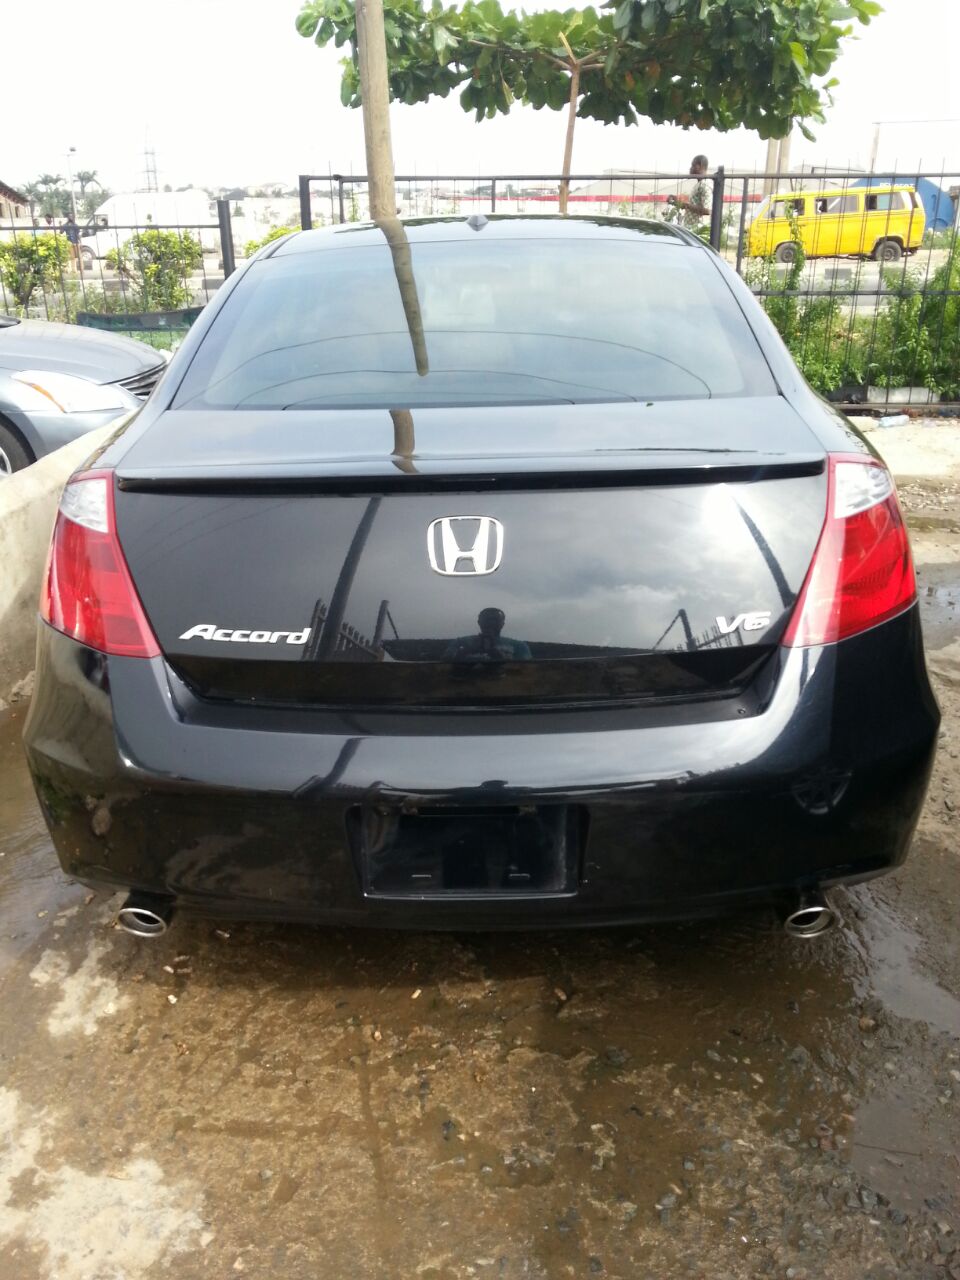 Registered 08 Honda Accord Coupe V6 Super Clean One Month Used Autos Nigeria